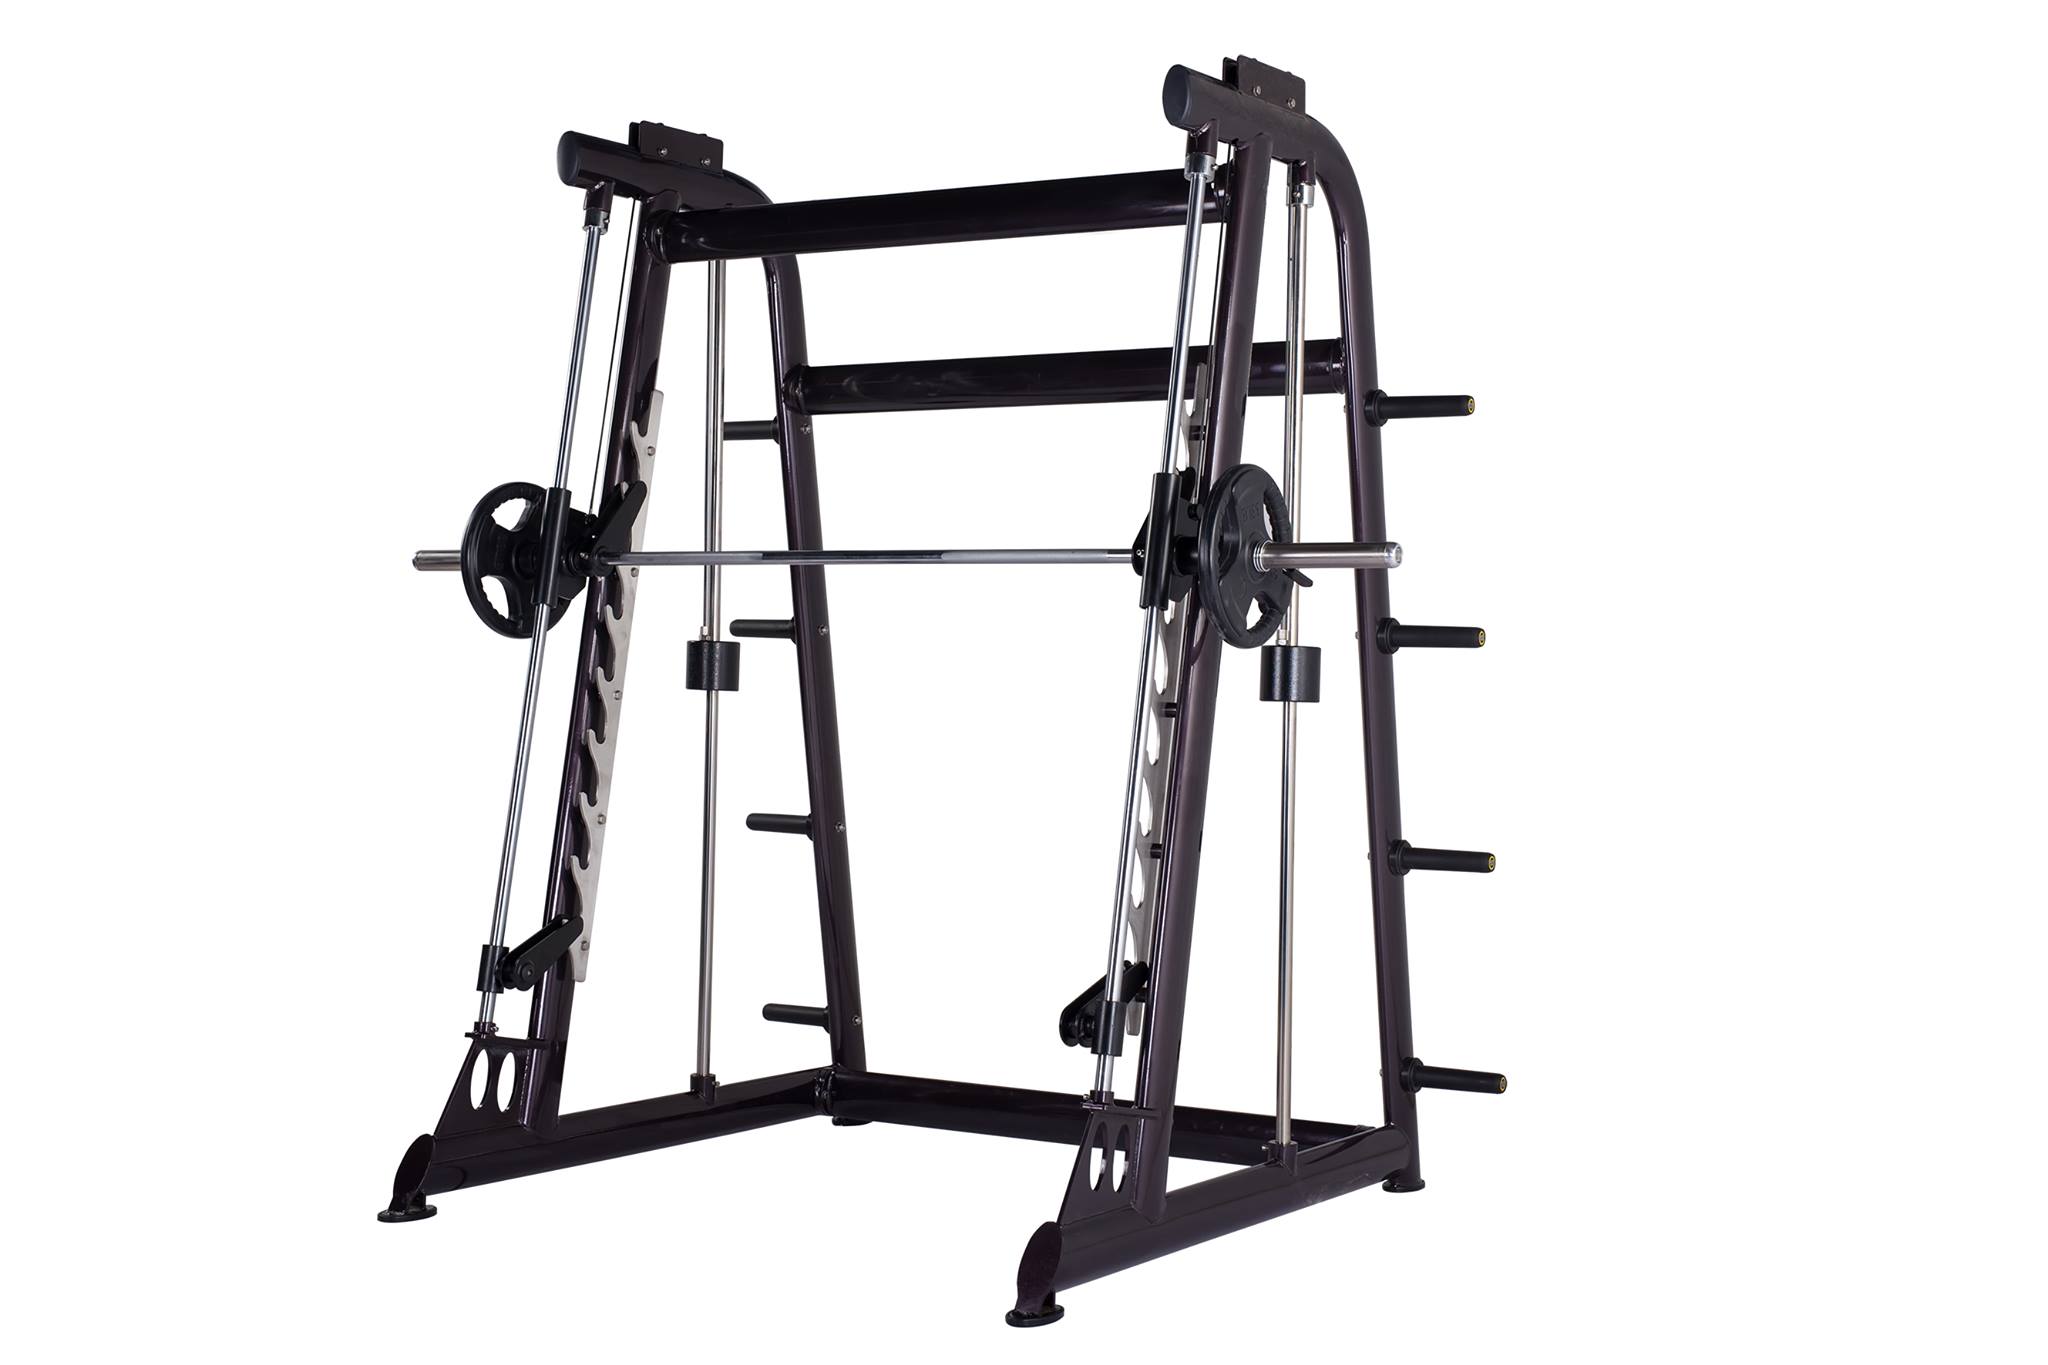 Imported Gym Equipment Manufacturer in India | Syndicate Gym